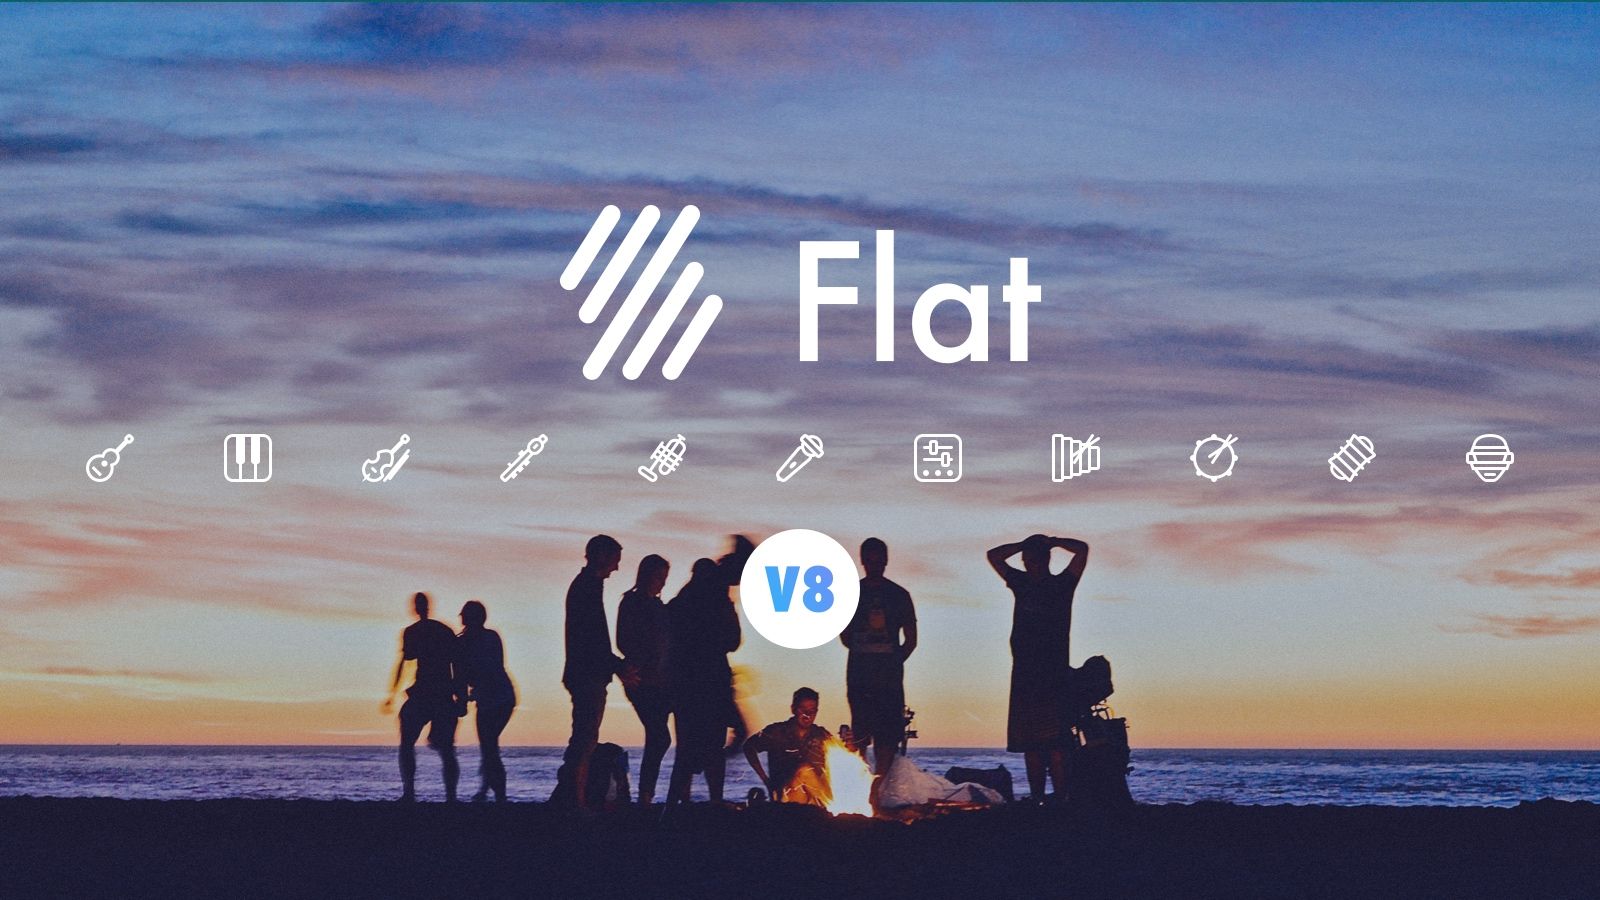 Flat V8 is now live